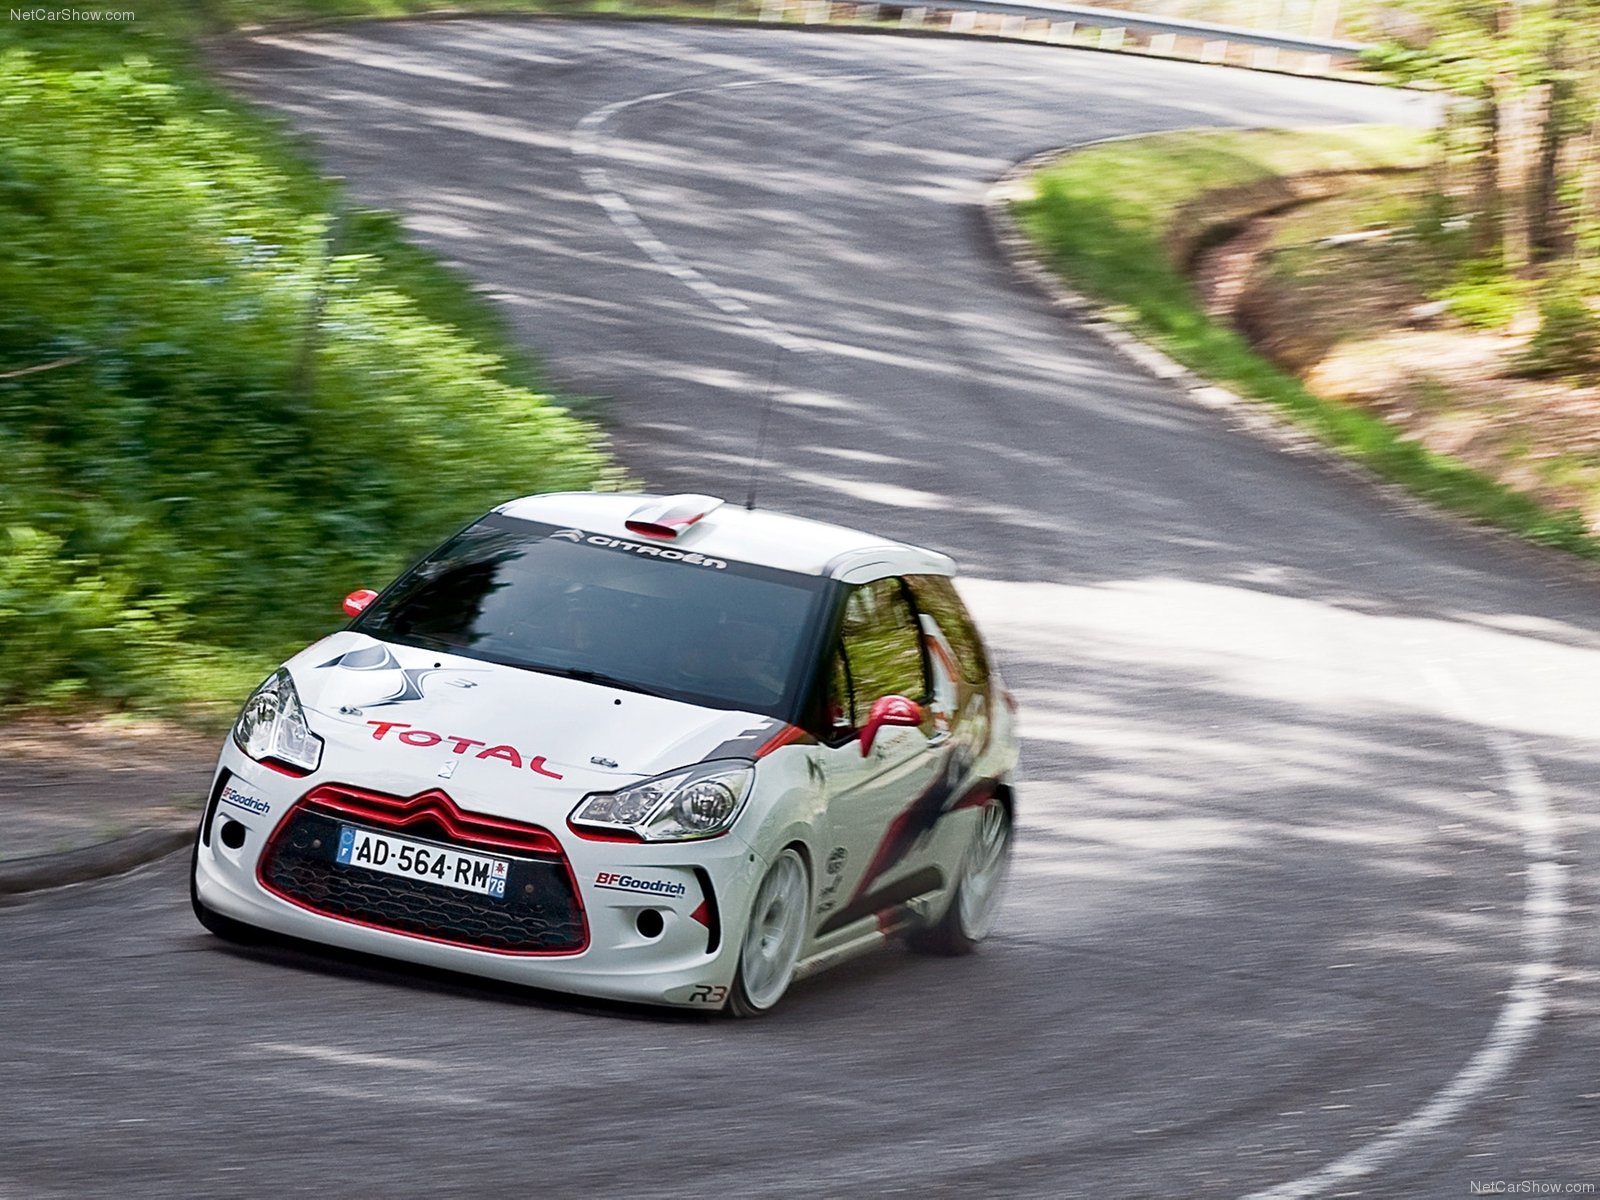 Citroen DS3 R3 sports car racing on a white road, with a sleek red and white design.